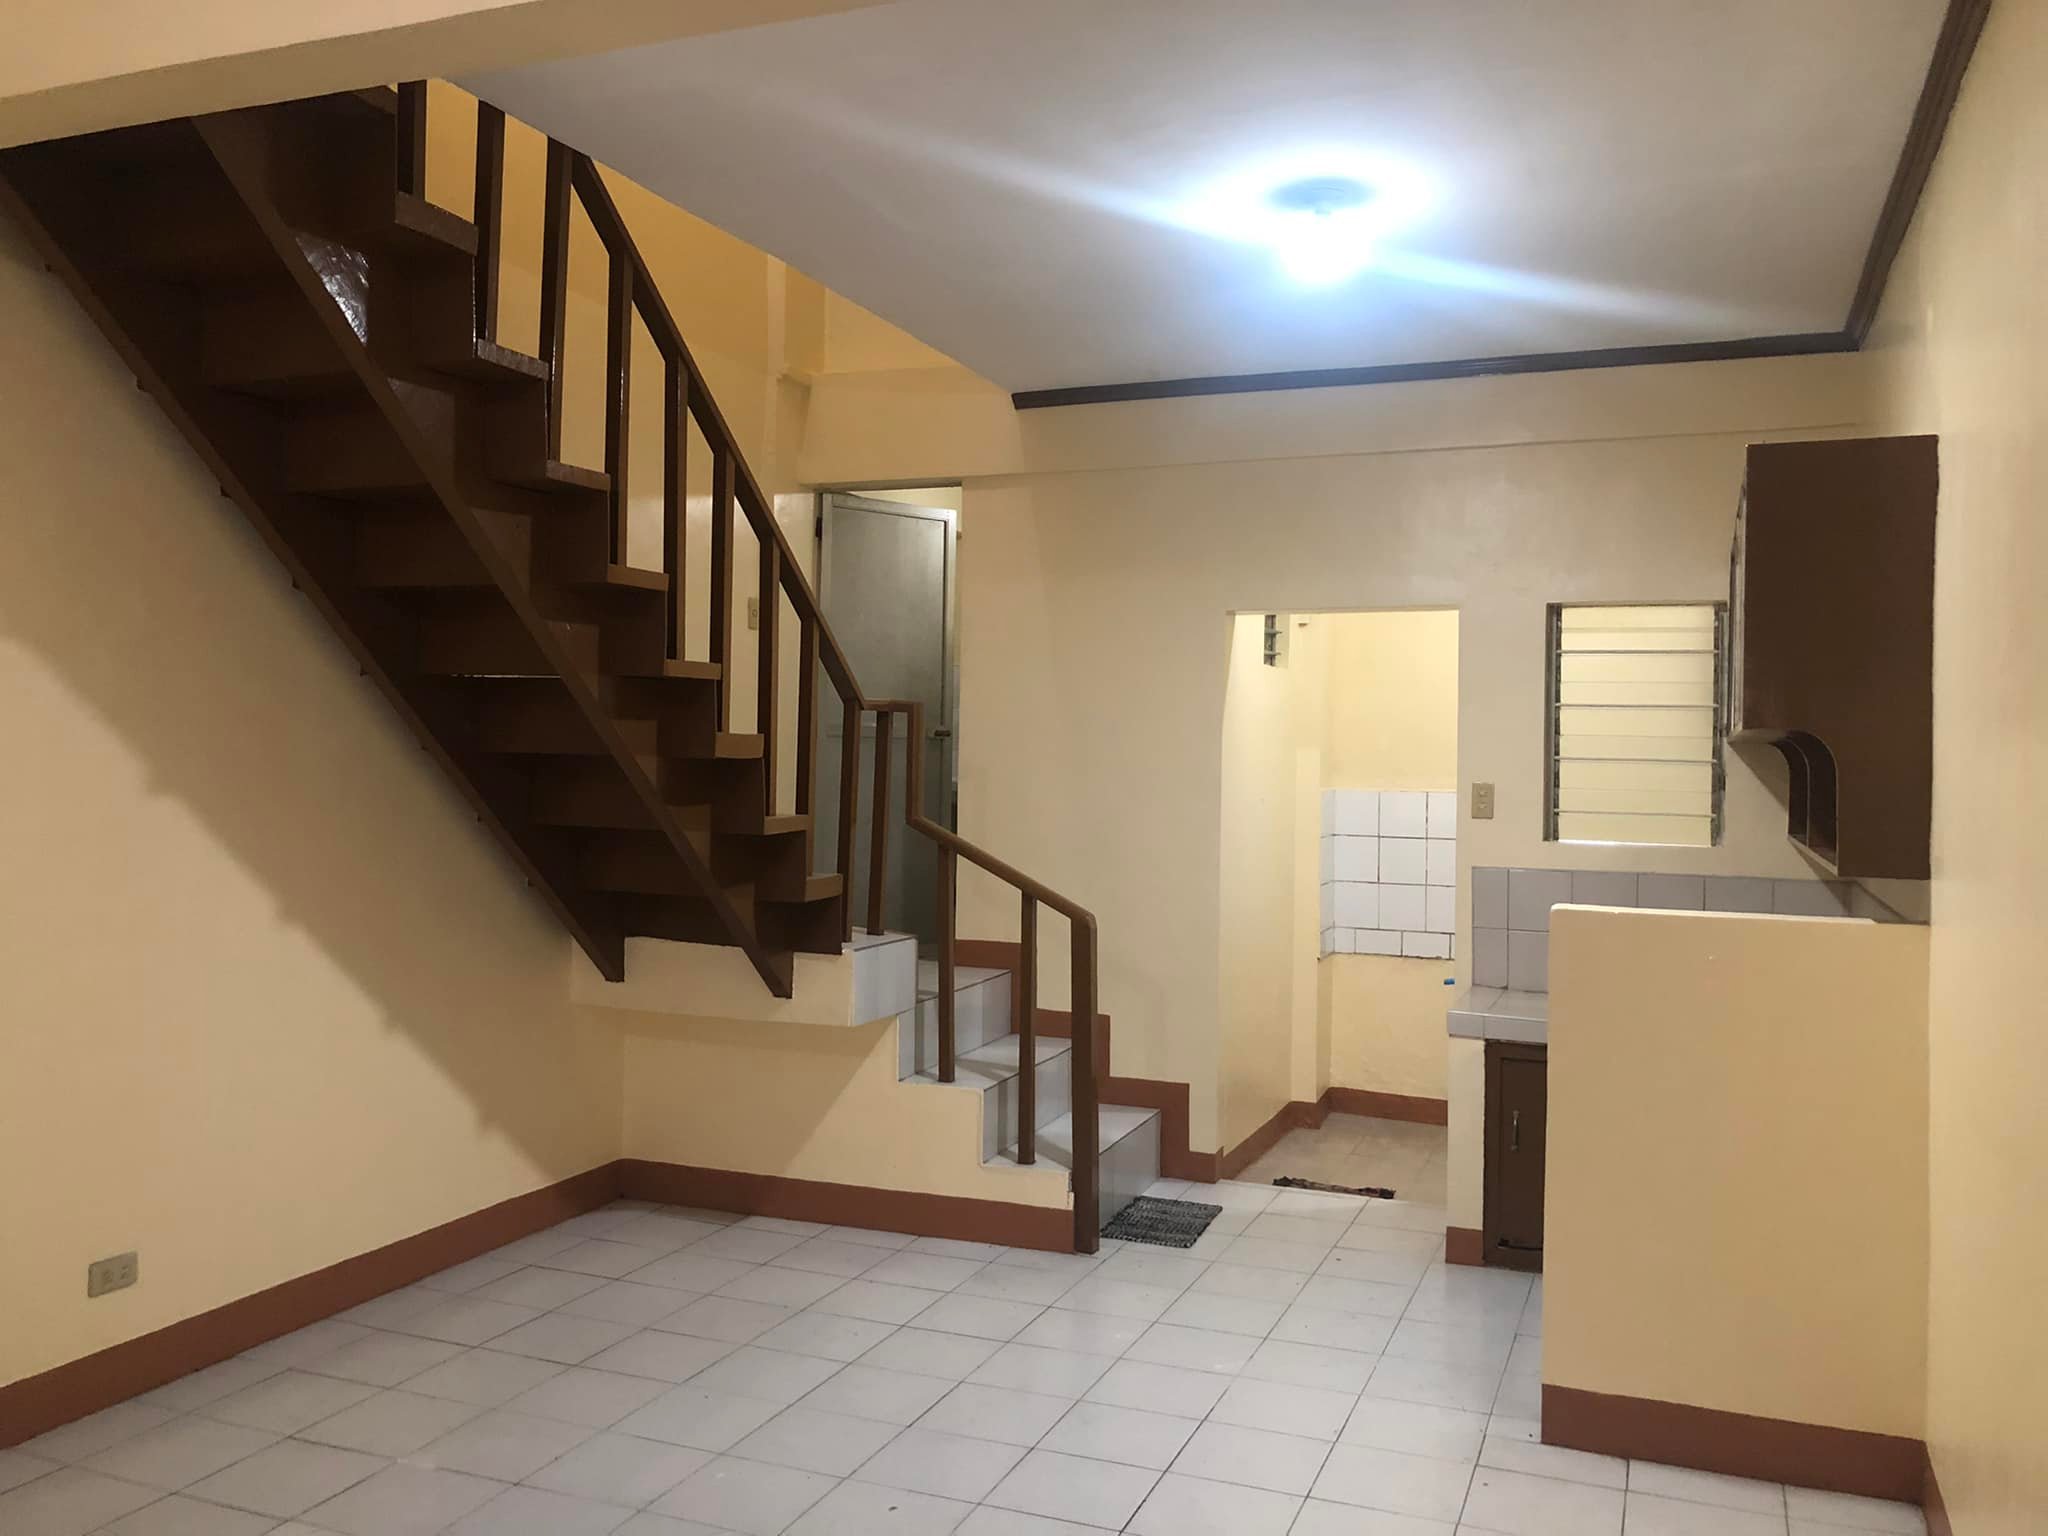 3 bedroom house for rent in Las Pinas Pamplona Tres